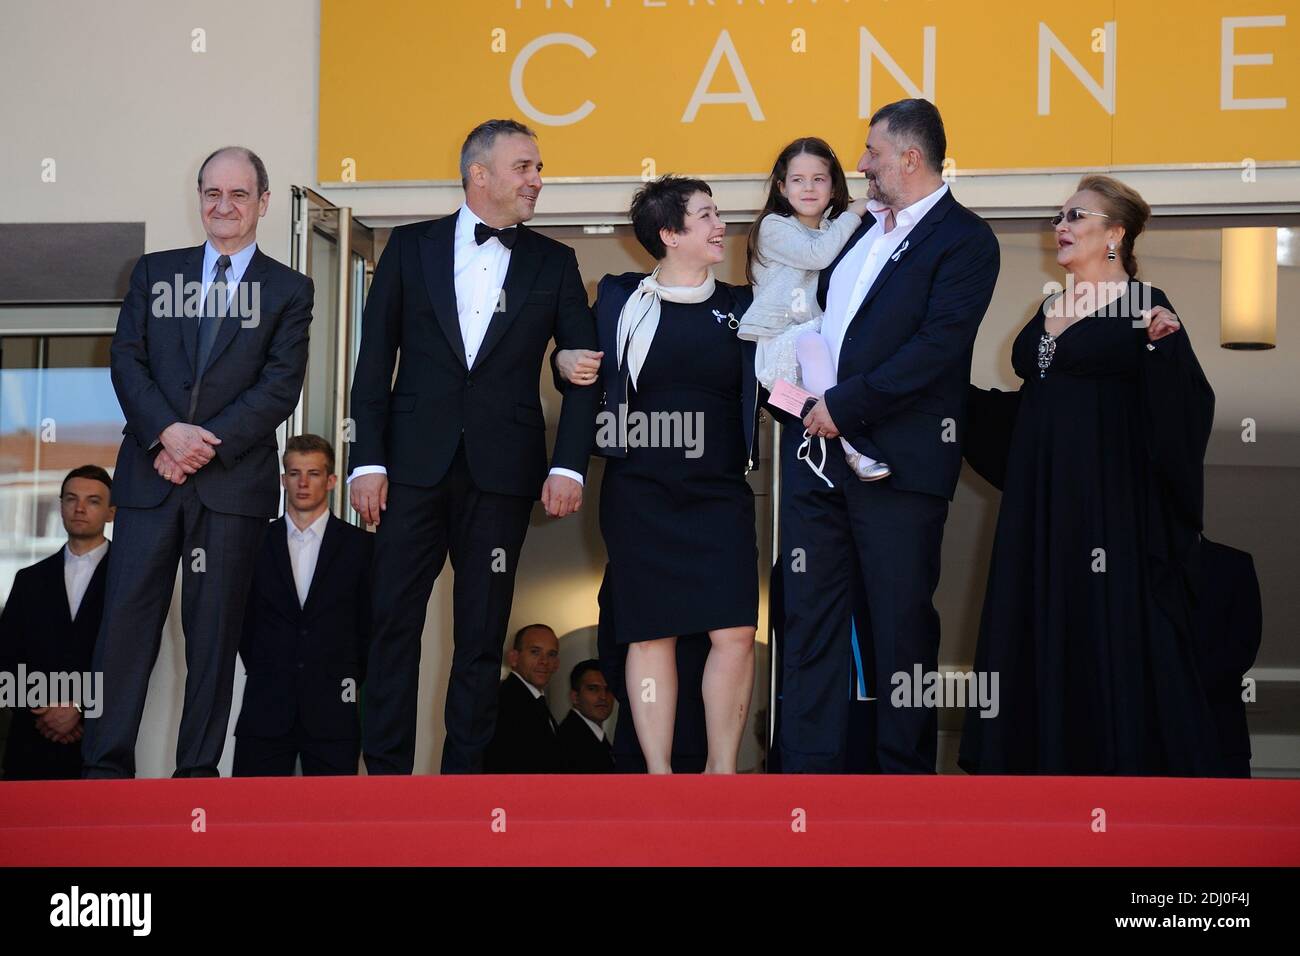 Pierre Lescure, Cristi Puiu, Zoe Puiu, Anca Puiu, Dana Dogaru and Mimi Branescu attending the 'Sieranevada' Screening at the Palais Des Festivals in Cannes, France on May 12, 2016, as part of the 69th Cannes Film Festival. Photo by Aurore Marechal/ABACAPRESS.COM Stock Photo